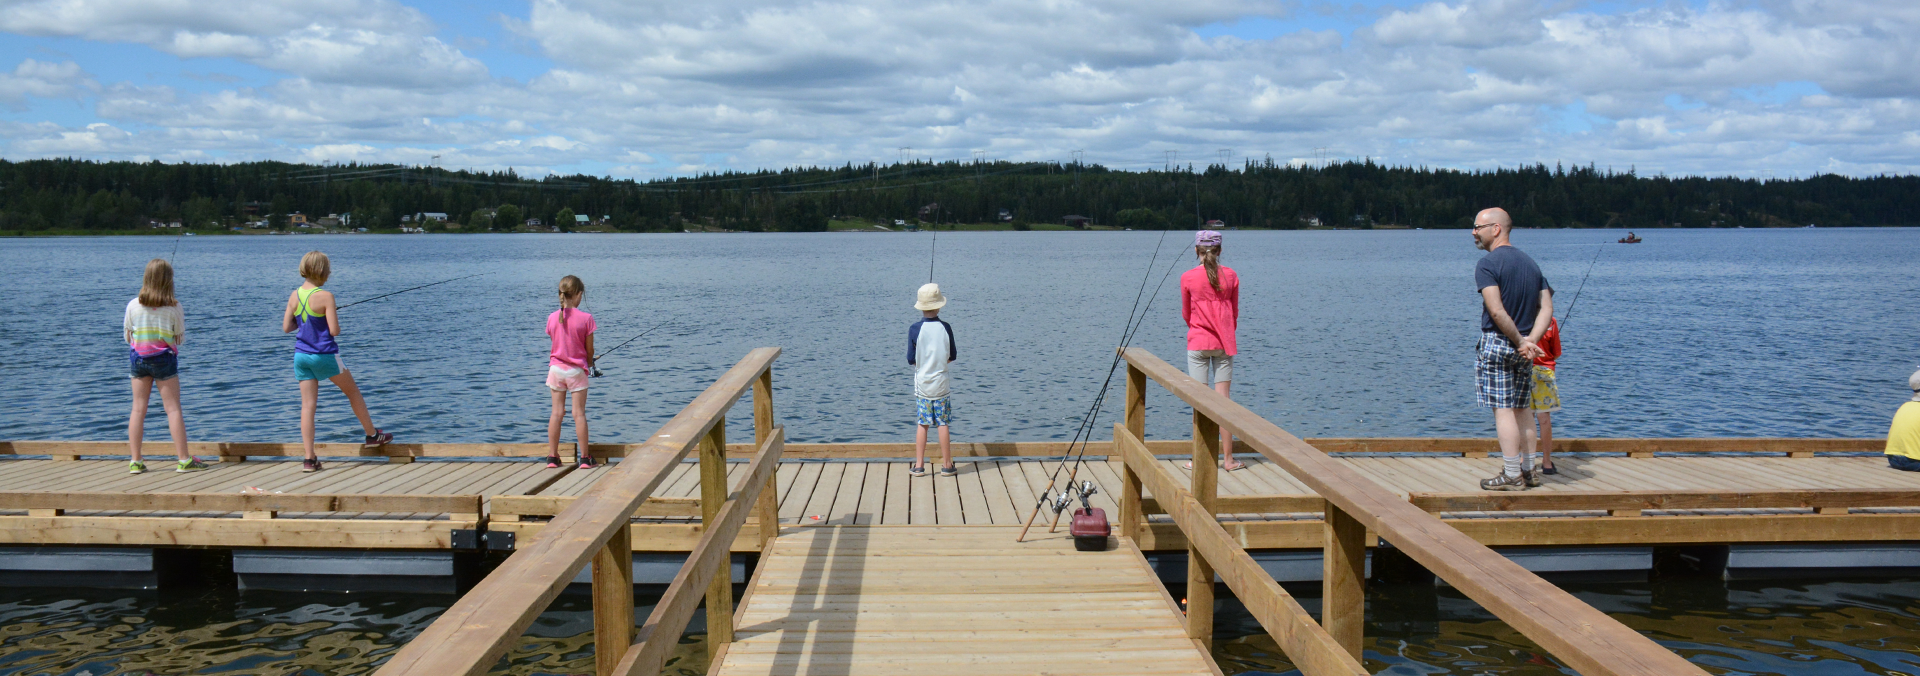 Tips for Shore and Dock Fishing Success